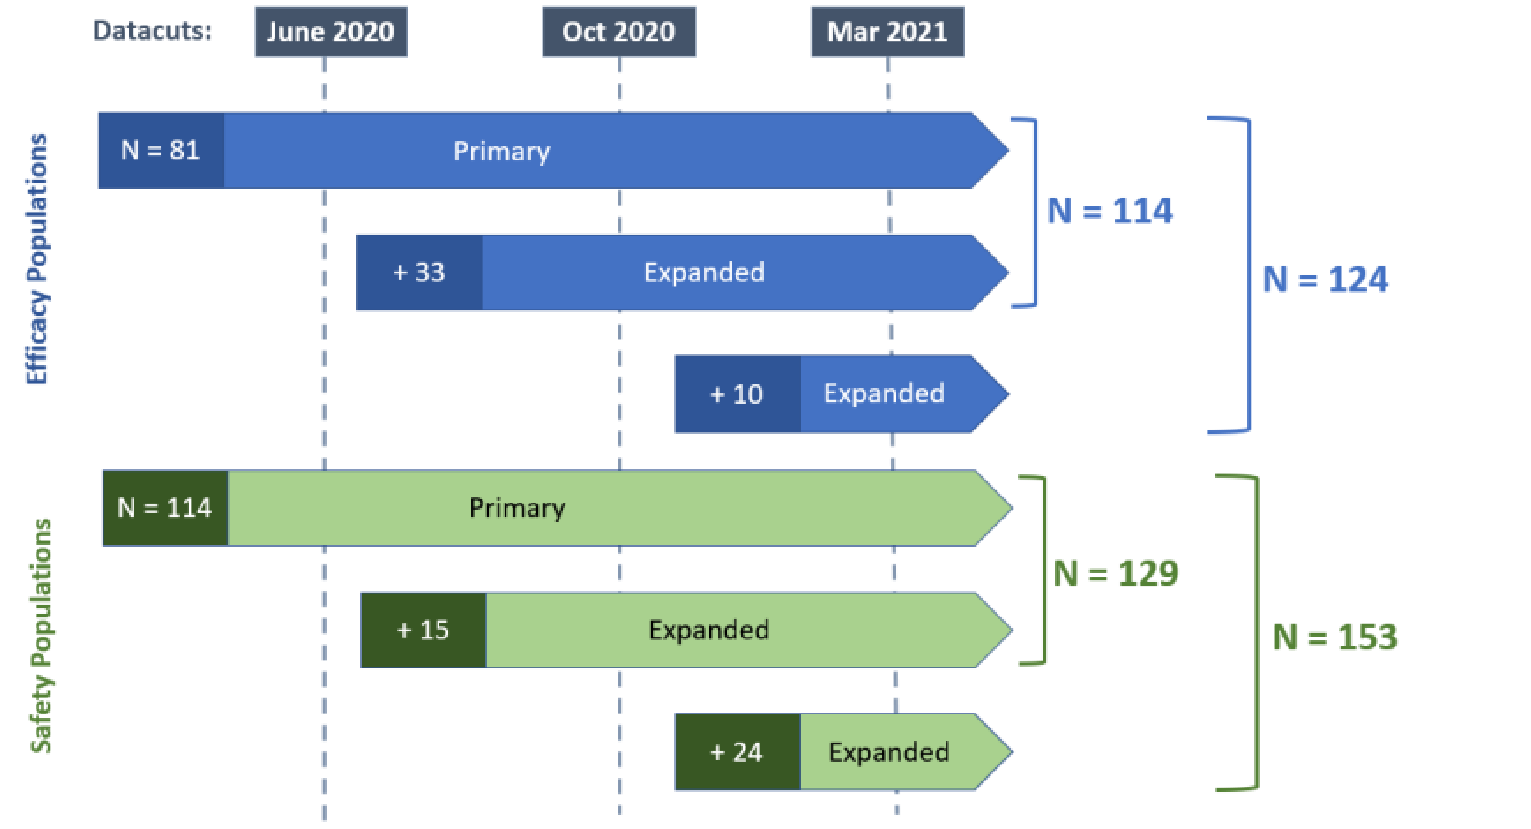 Visual depiction of patient enrolment over time to the analysis populations in cohort D of CHRYSALIS. As of the June 2020 data cut-off (DCO), the primary efficacy population comprised 81 patients, which included patients who received the first dose of amivantamab as monotherapy on or before February 5, 2020, and were to have undergone at least 3 scheduled postbaseline disease assessments. These patients were followed throughout the interim analyses for longer follow-up. An additional 33 patients were added to the efficacy population (the expanded efficacy population) as of the October 2020 DCO, for a total of 114 patients. As of the March 30, 2021, DCO, 10 more patients were added to the efficacy population, for a total of 124 patients. These patients are included as the additional efficacy population. As of the June 2020 DCO, 114 patients had received at least 1 dose of amivantamab monotherapy and made up the safety population. At the October 2020 and March 30, 2021, DCOs, 15 and 24 additional patients, respectively, were enrolled, for a total of 153 patients in the safety analysis set.